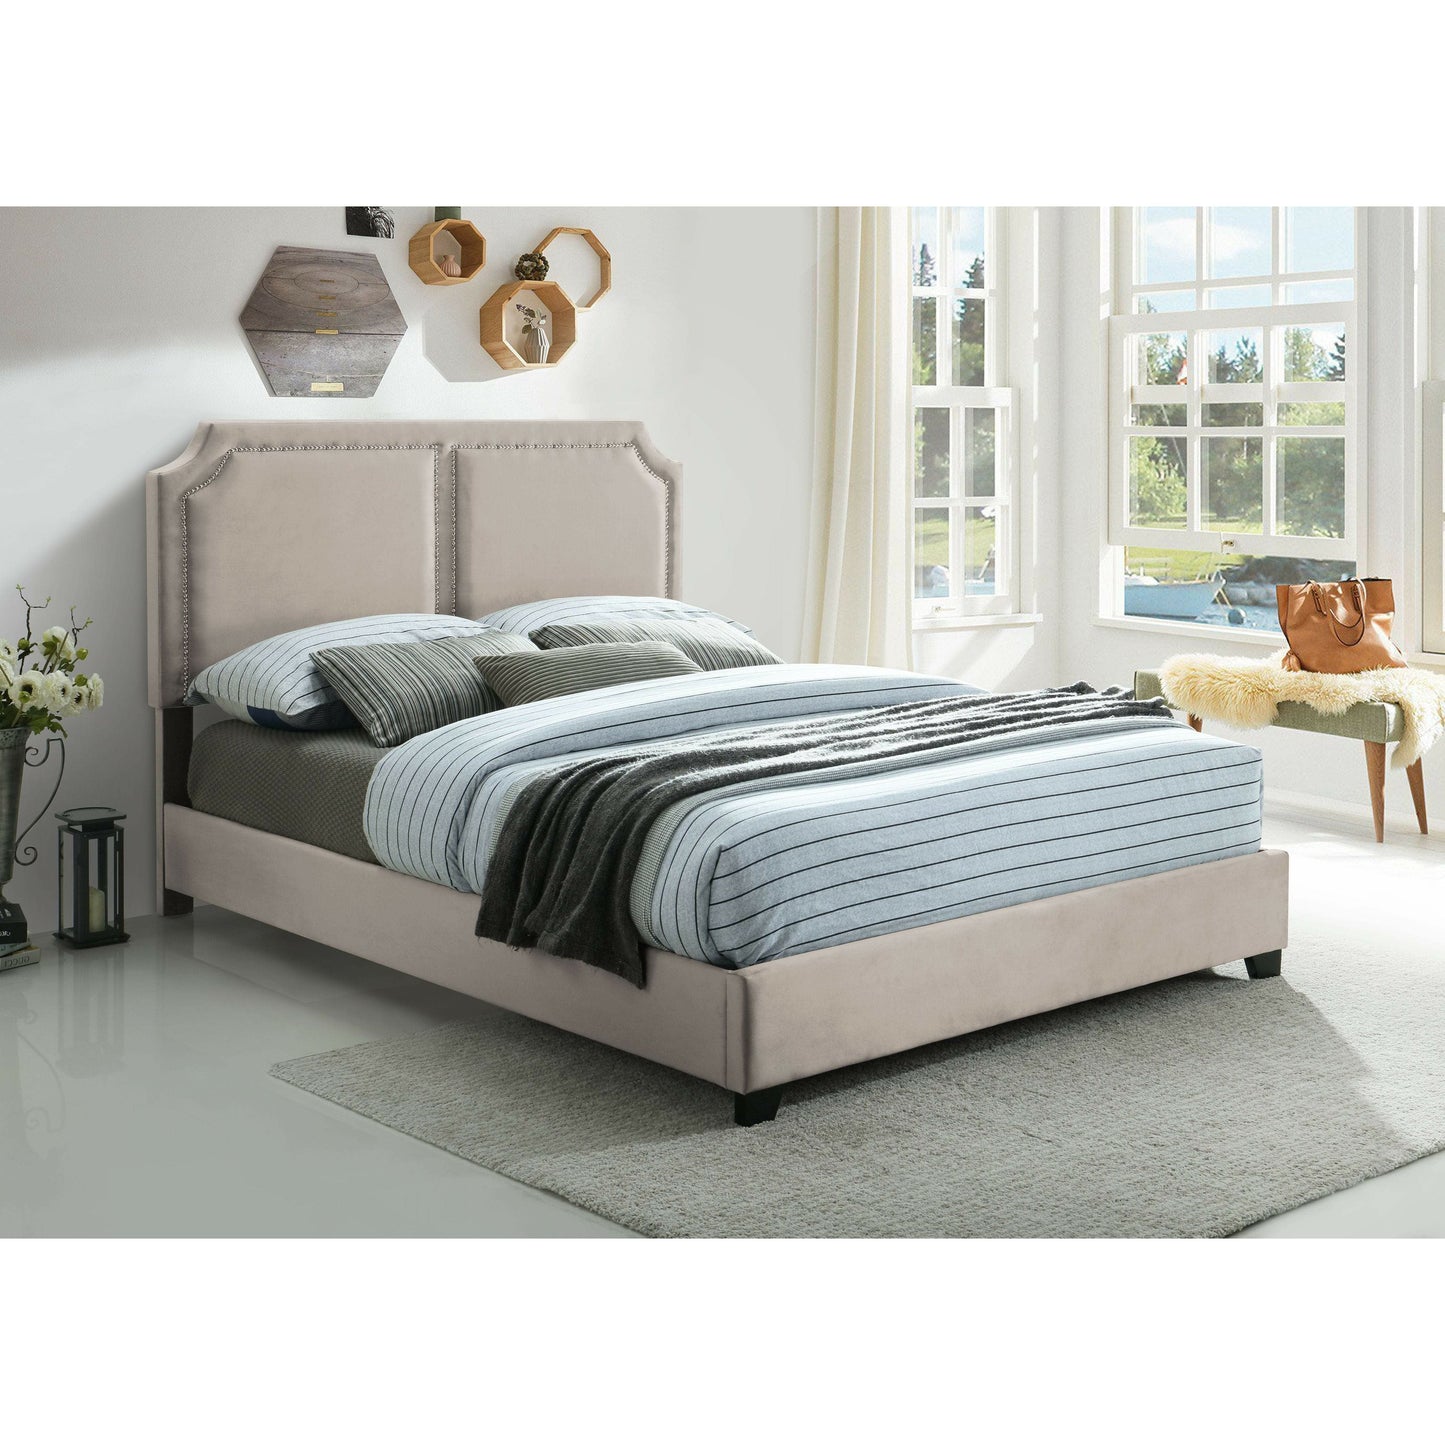 MYCO Bed Champagne Kimberly Nailhead Queen Bed, Gray